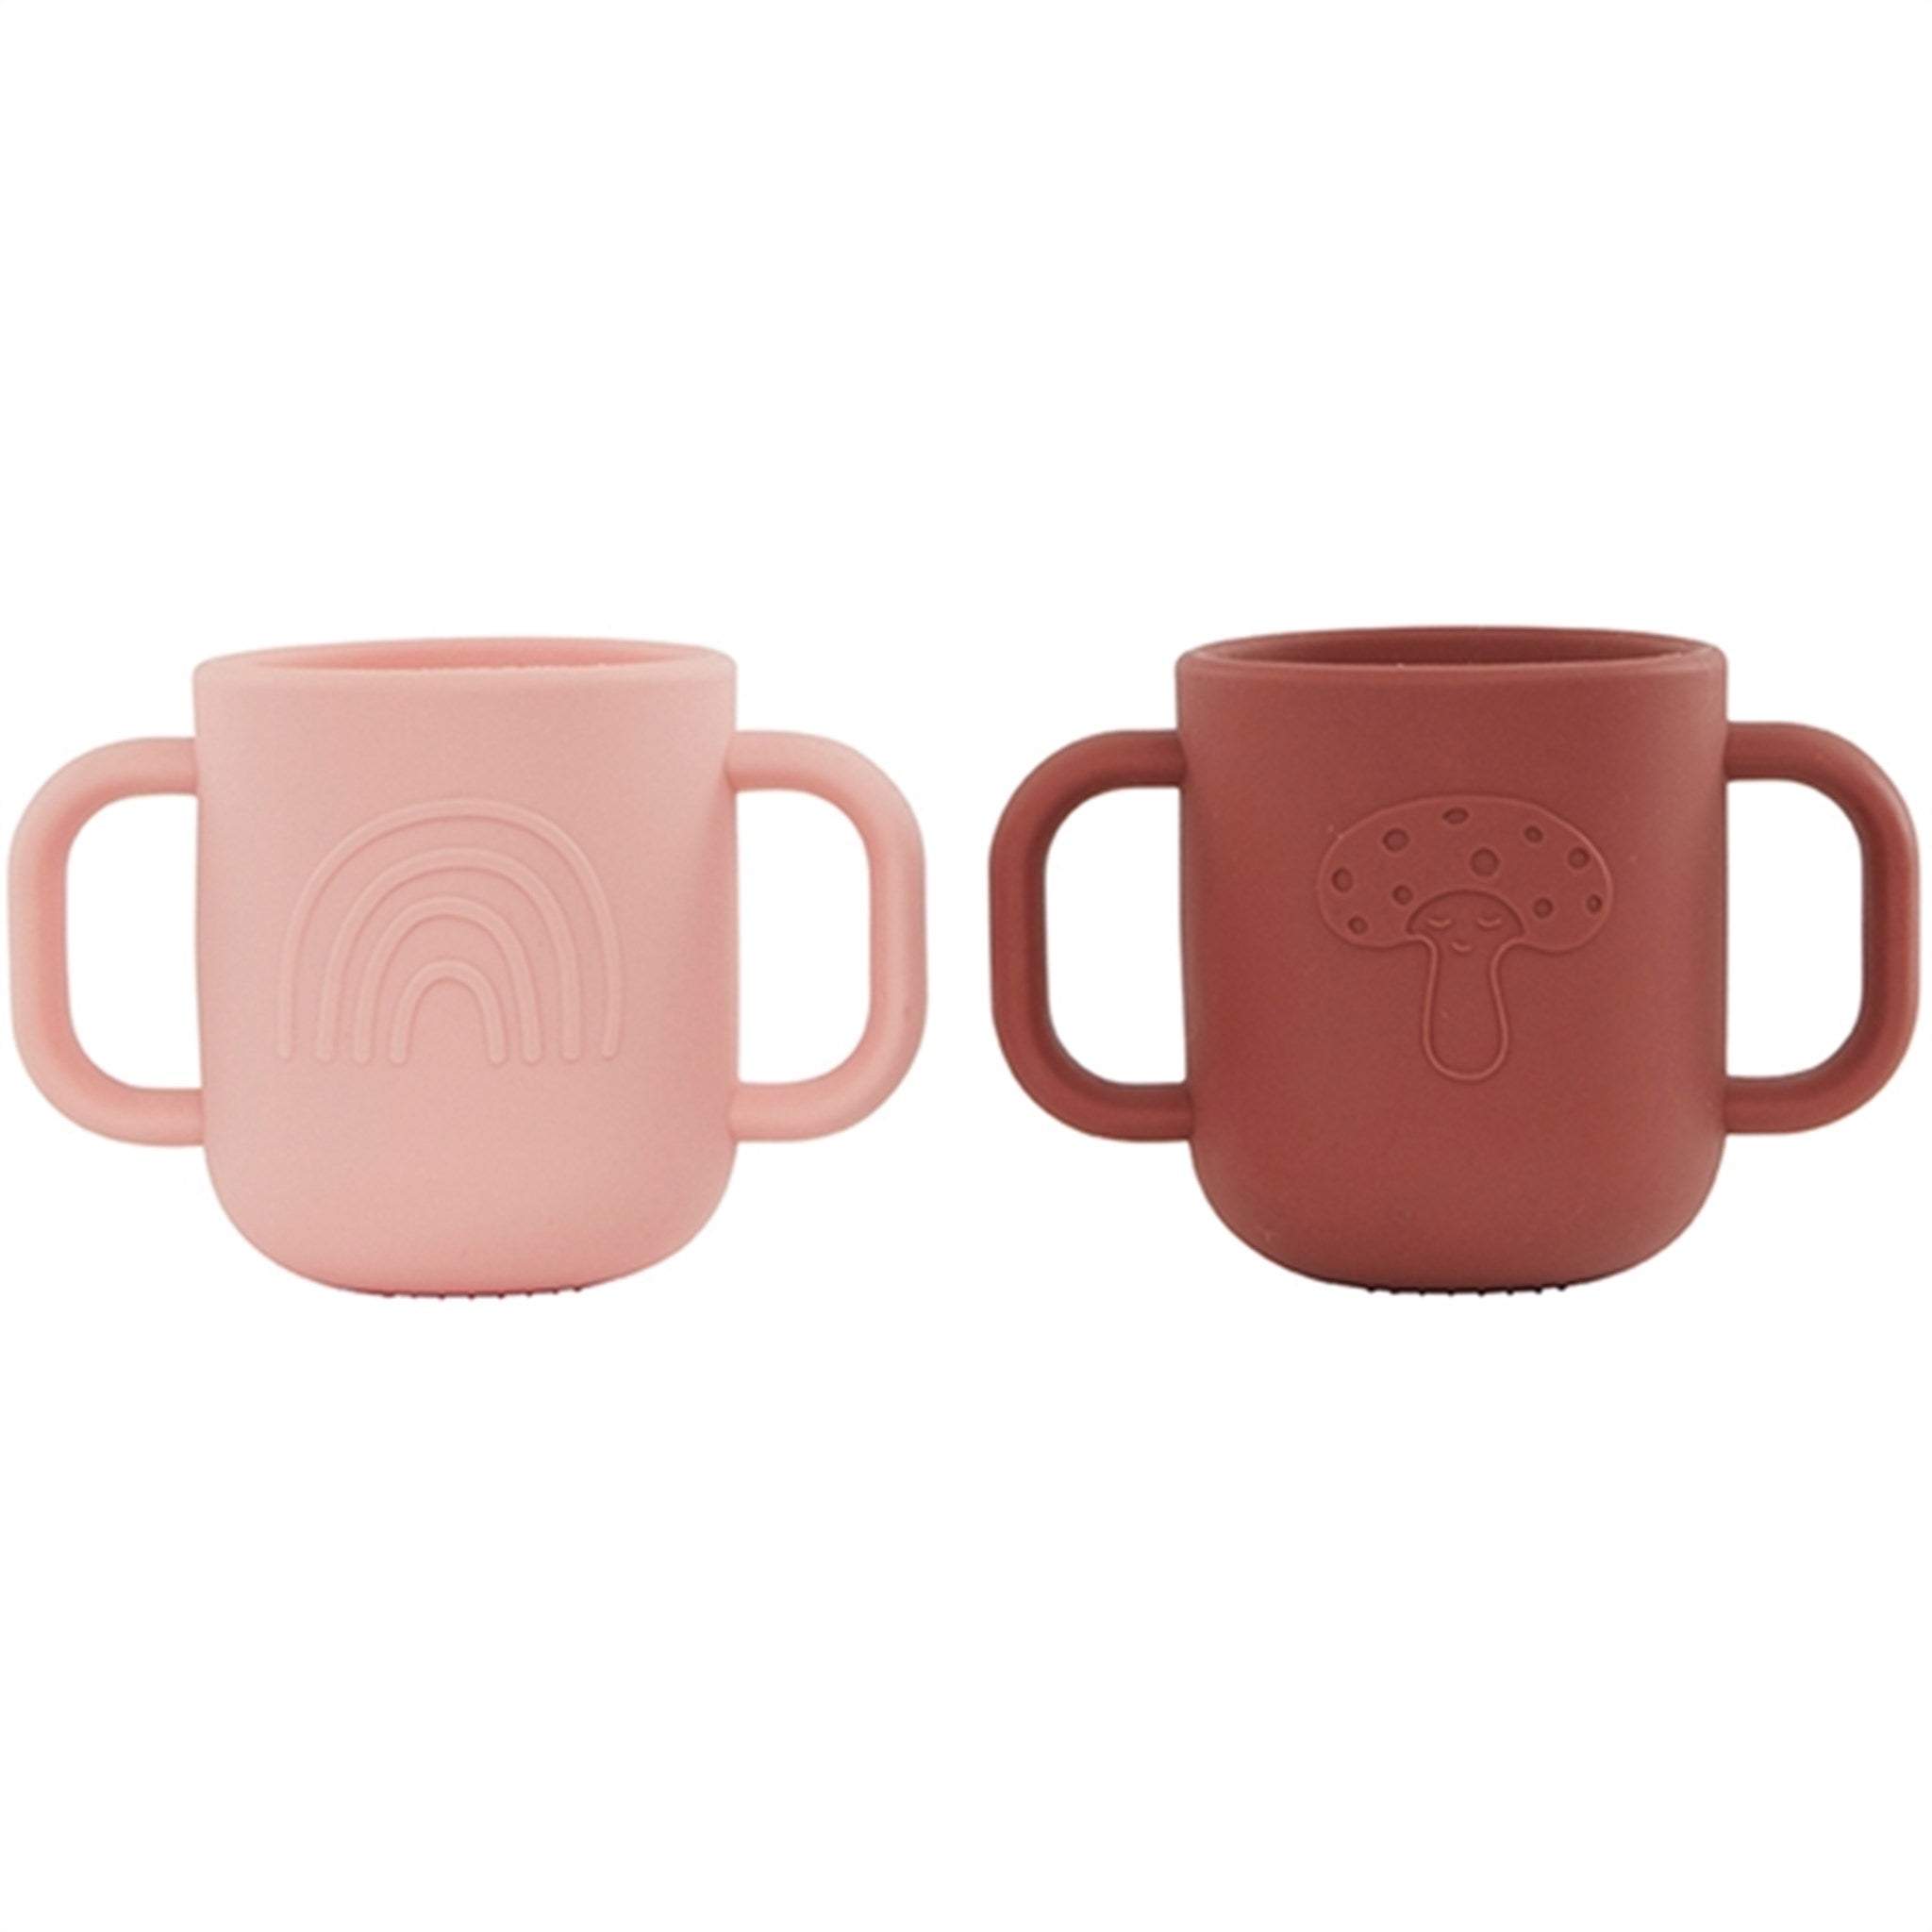 OYOY Kappu Cup 2-Pack Coral/Nutmeg